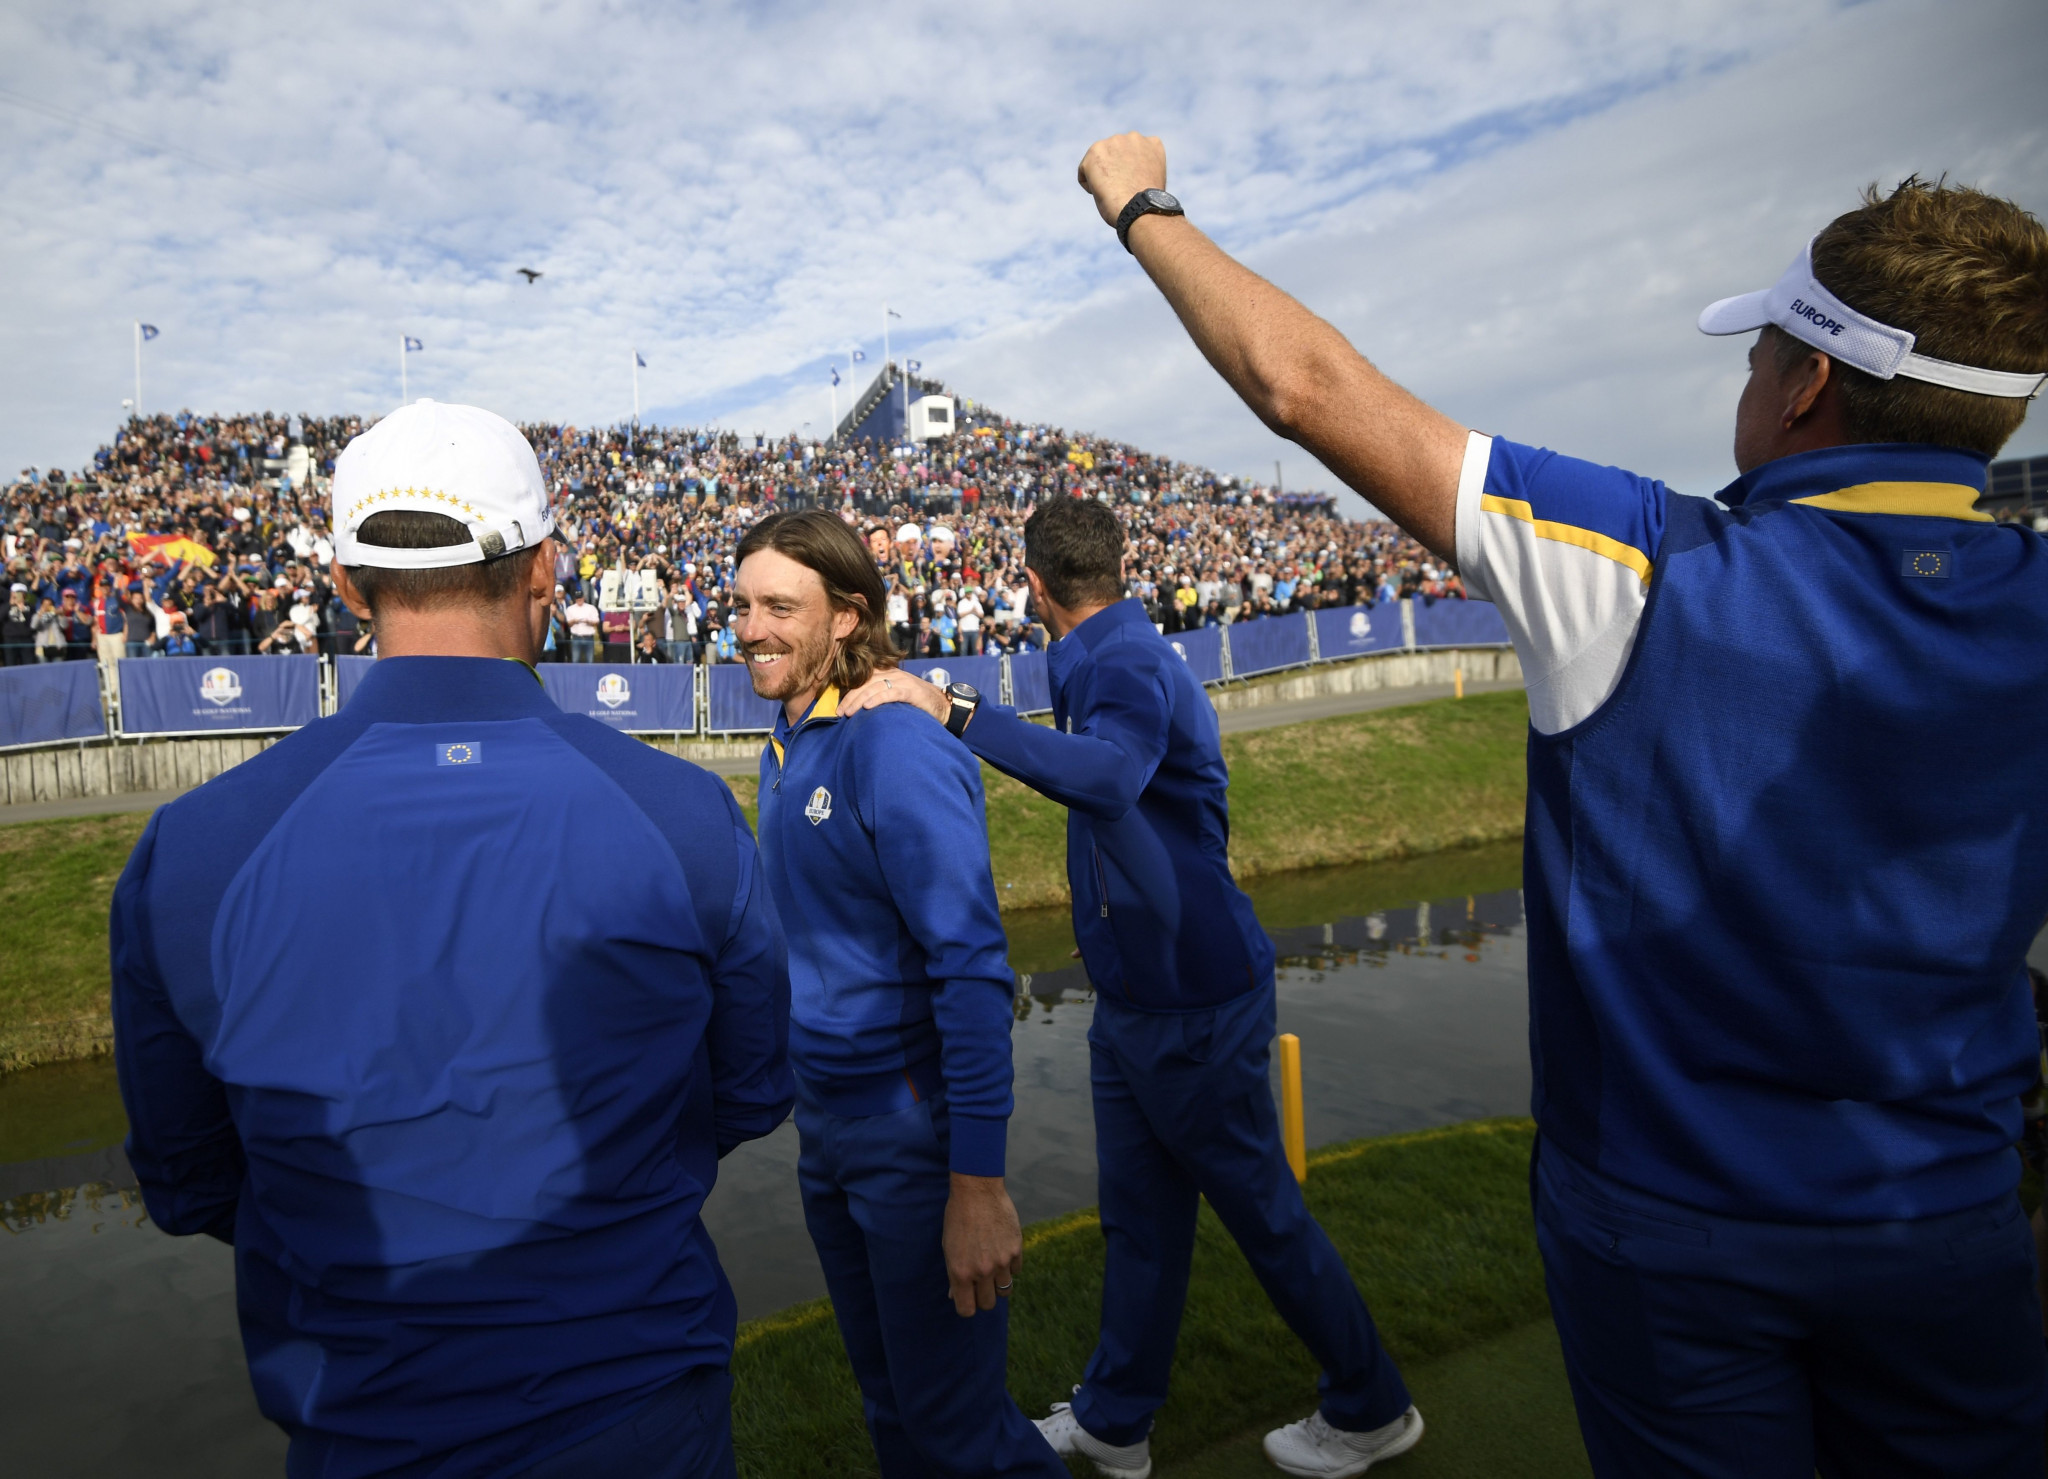 Europe regain Ryder Cup as Molinari and Garcia become history men